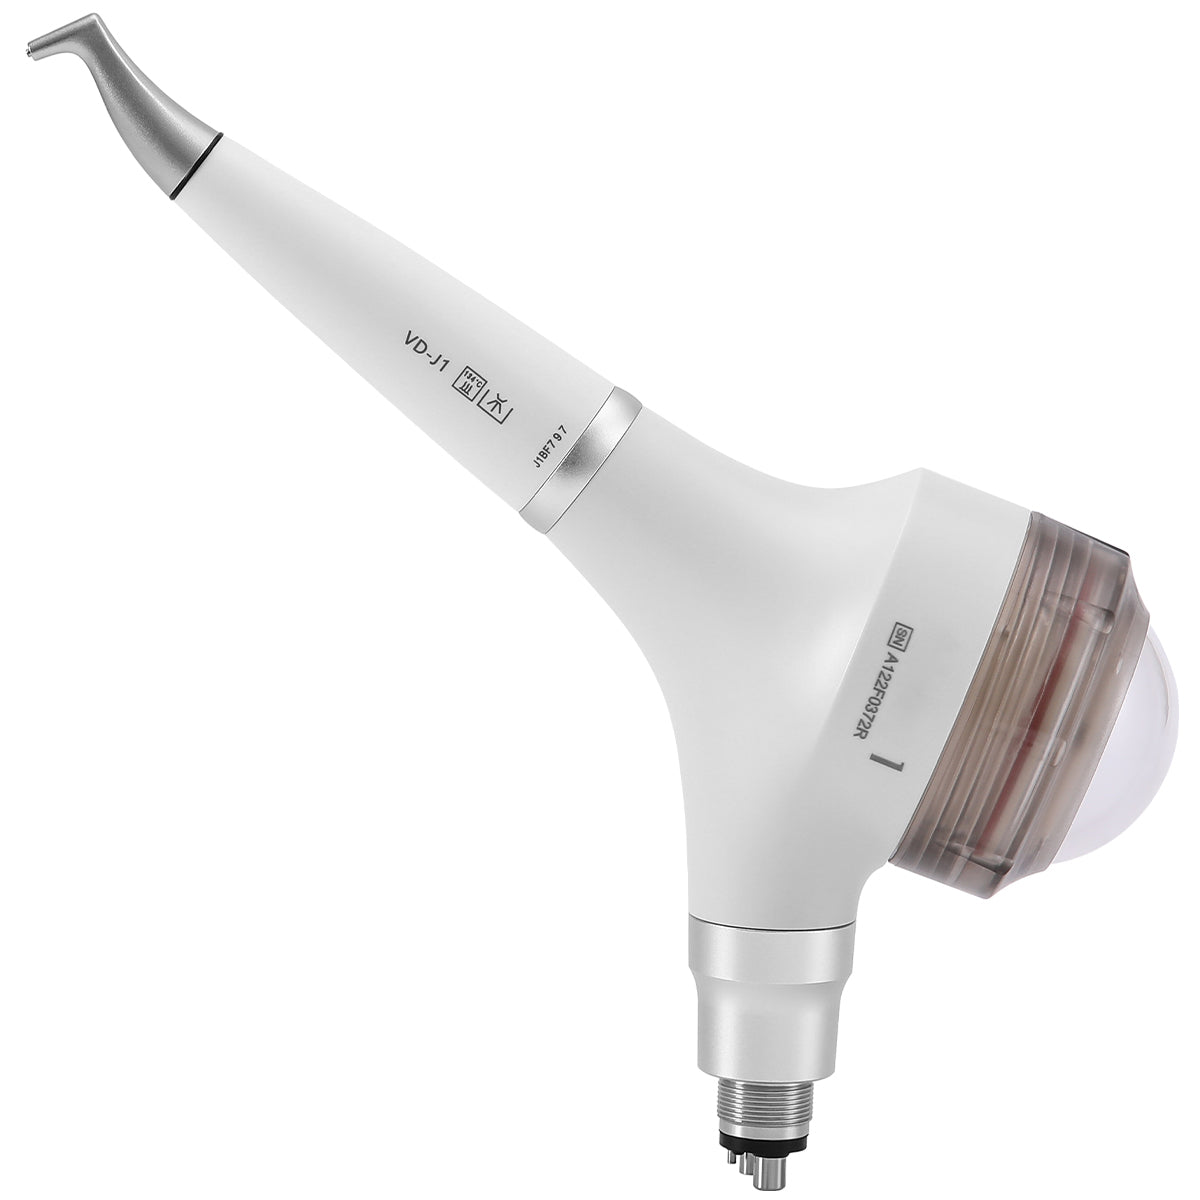 AZDENT Dental Air Polisher Prophy Teeth Whitening A1S Detachable 360° Rotating Handpiece With 4 Holes Quick Coupler Light Grey - azdentall.com